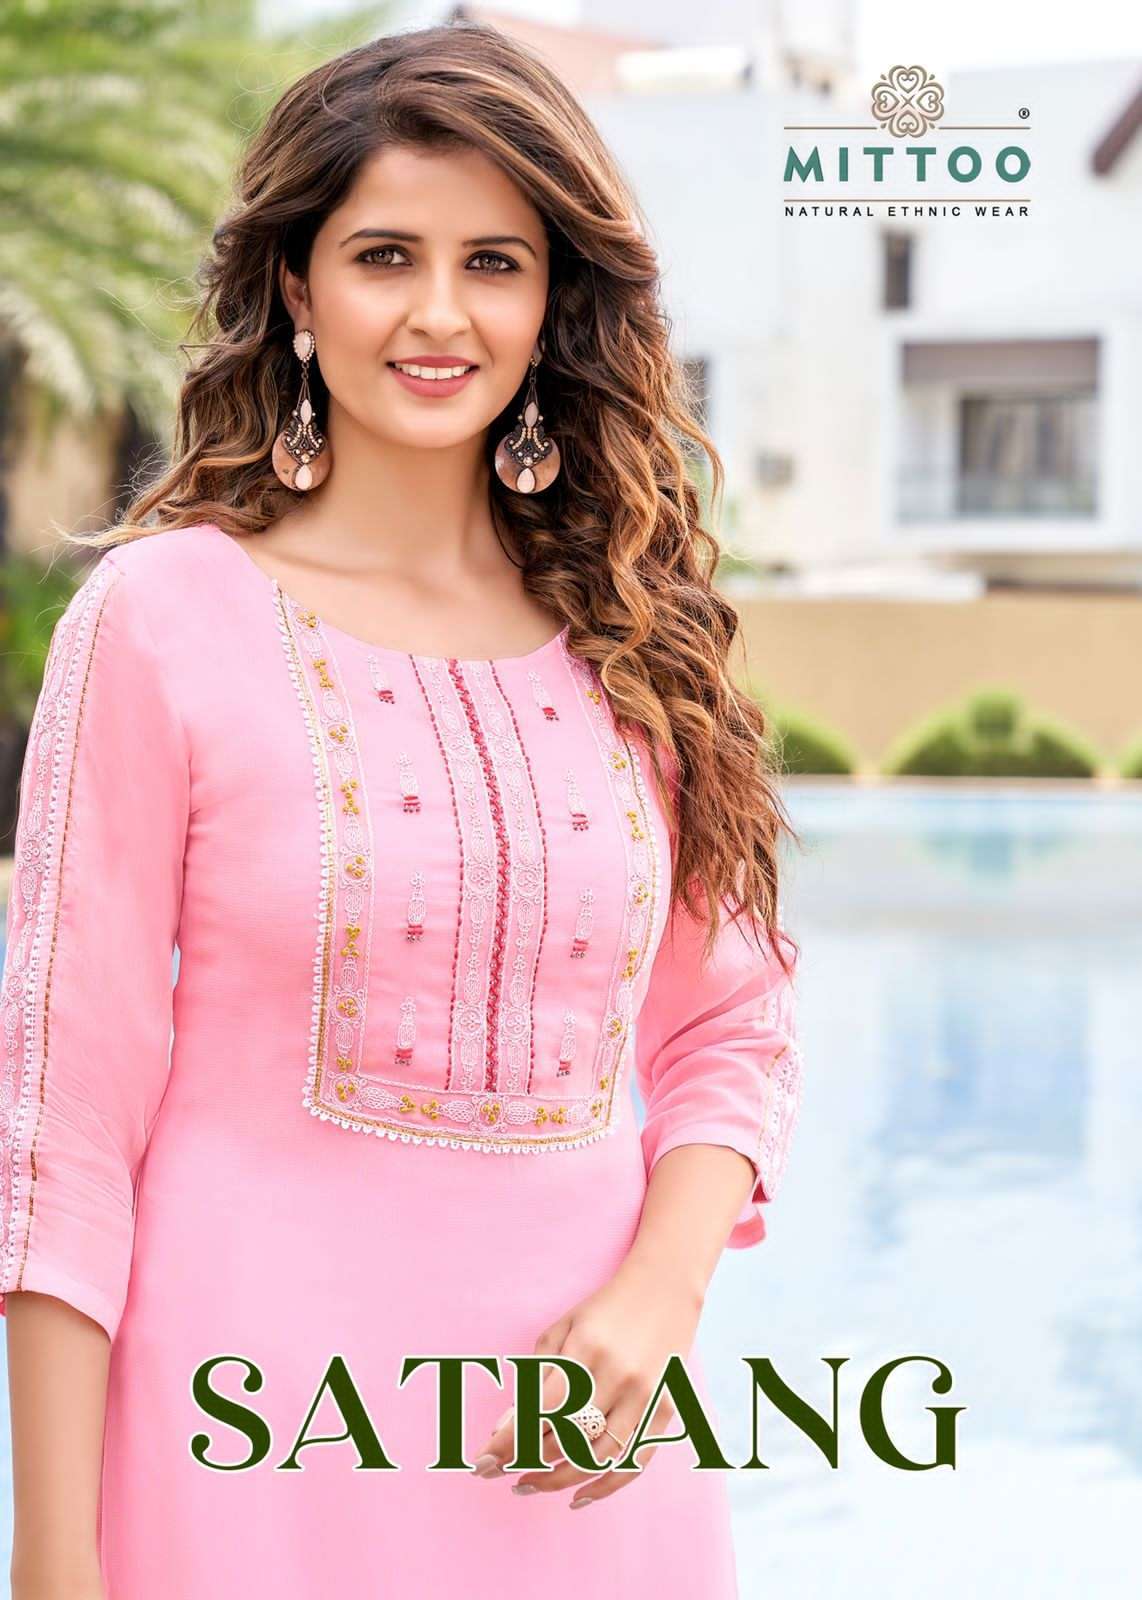 Mittoo Satrang Fancy Georgette Straight Kurti Collection in surat